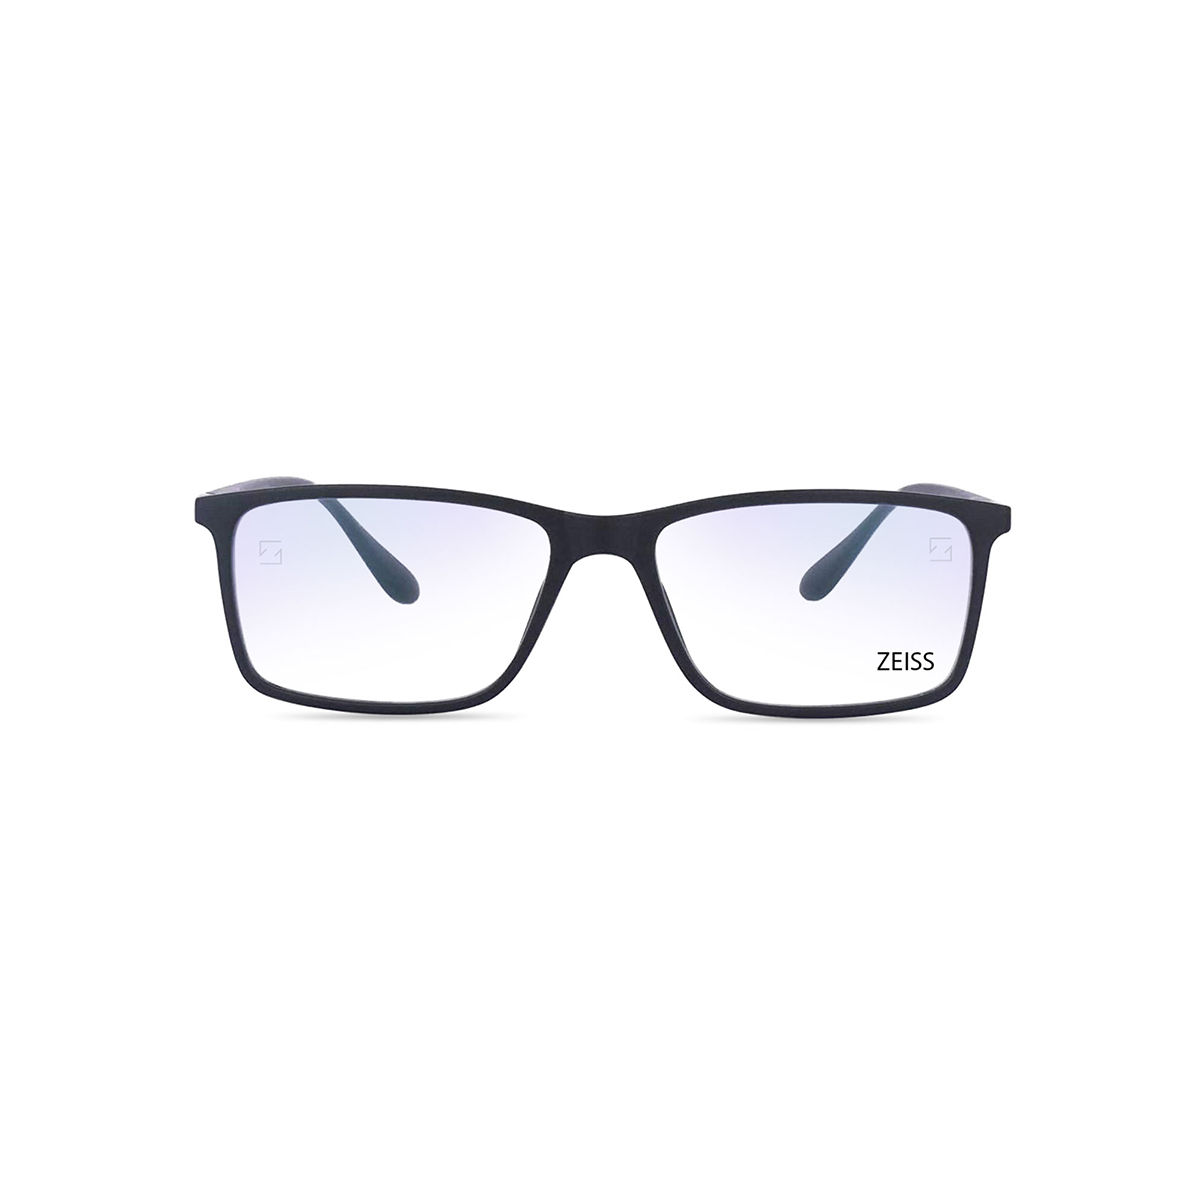 Intellilens Zeiss Square Dura Vision Blue Protect Computer Glasses For Eye Protection